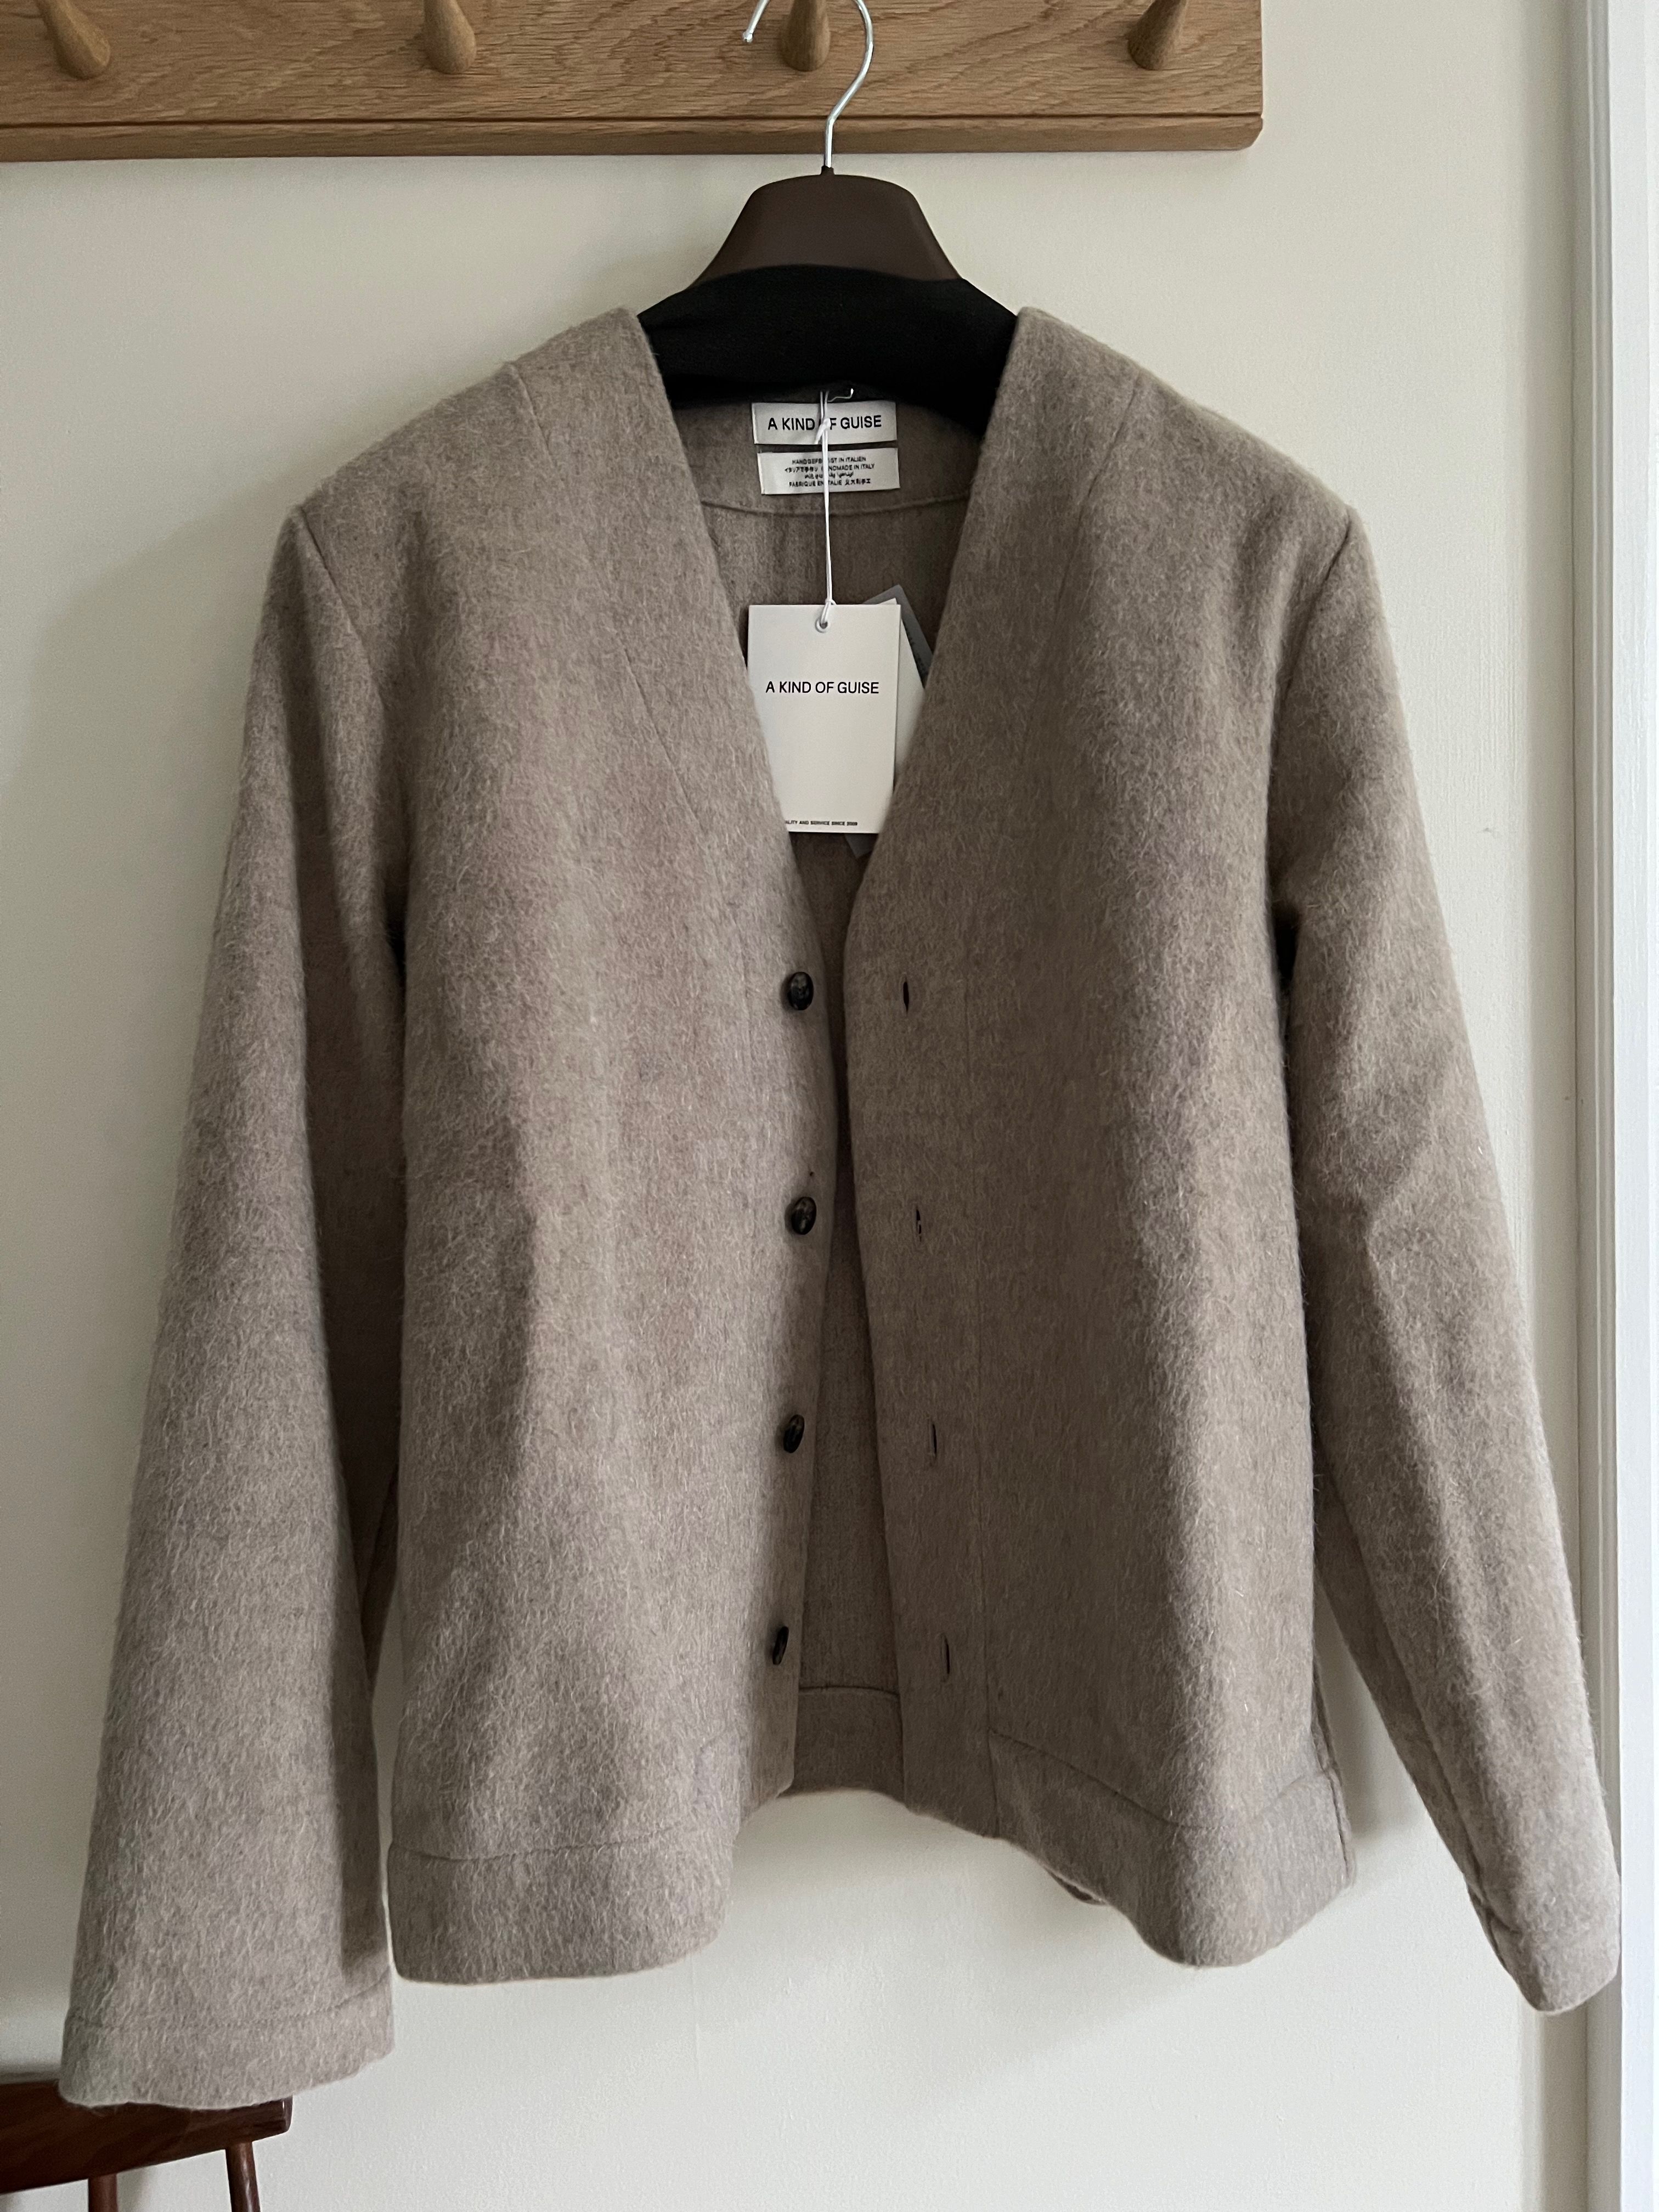 Pre-owned A Kind Of Guise Kura Cardigan Cloud Creme